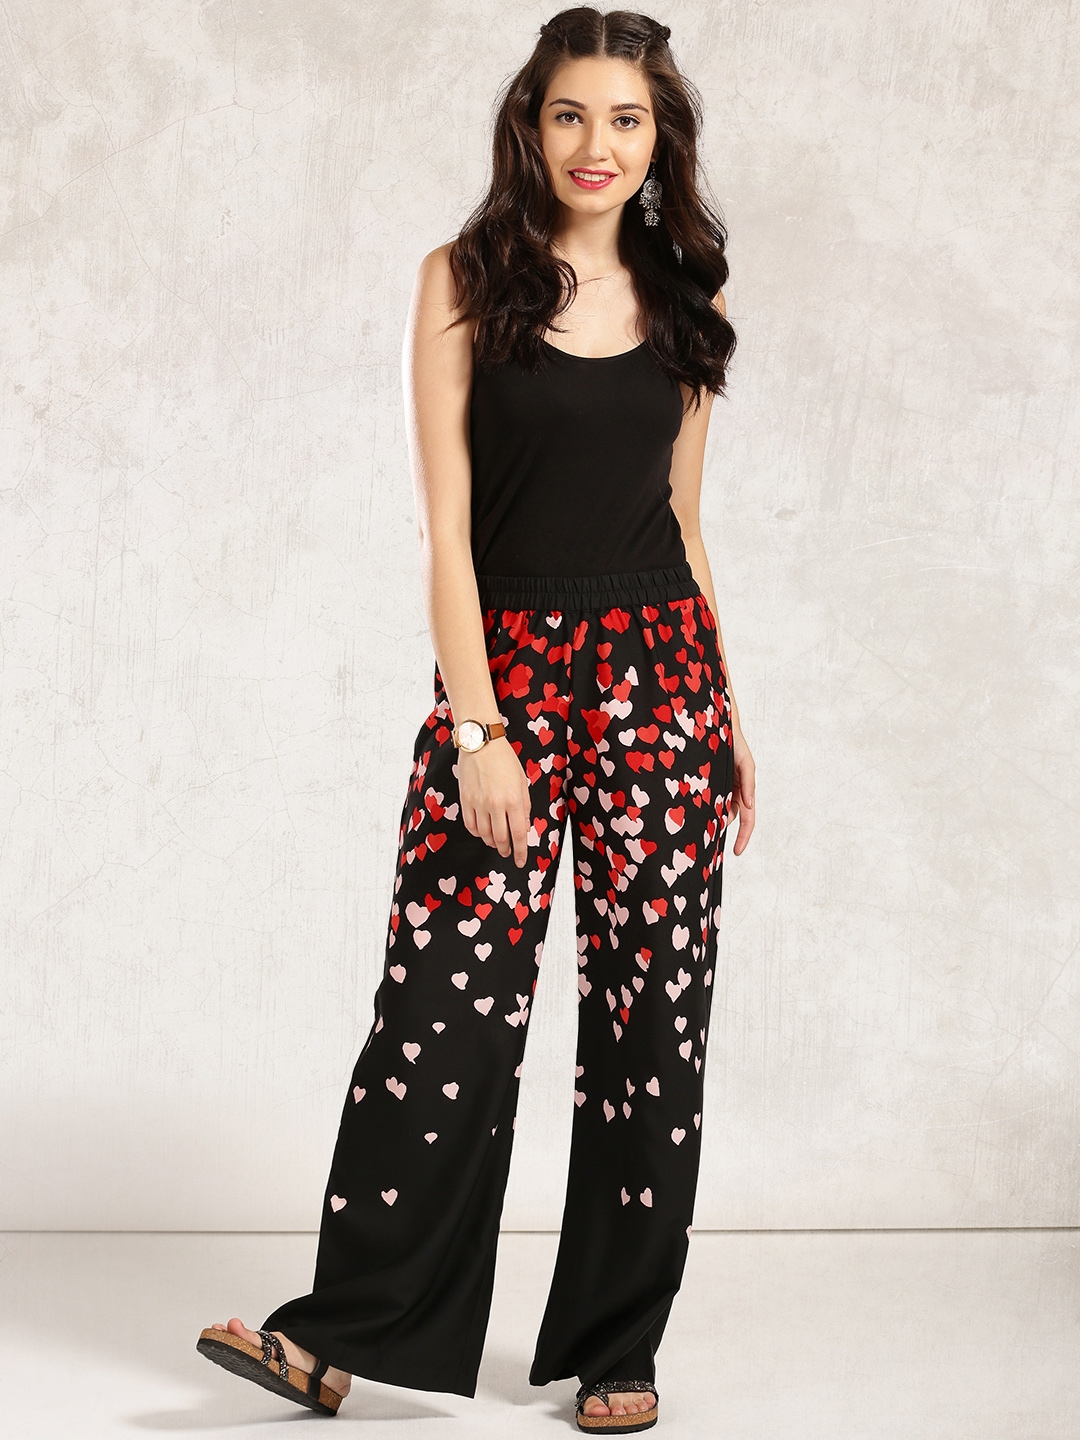 Buy Anouk Black & Red Printed Palazzos - Palazzos for Women 1709073 ...